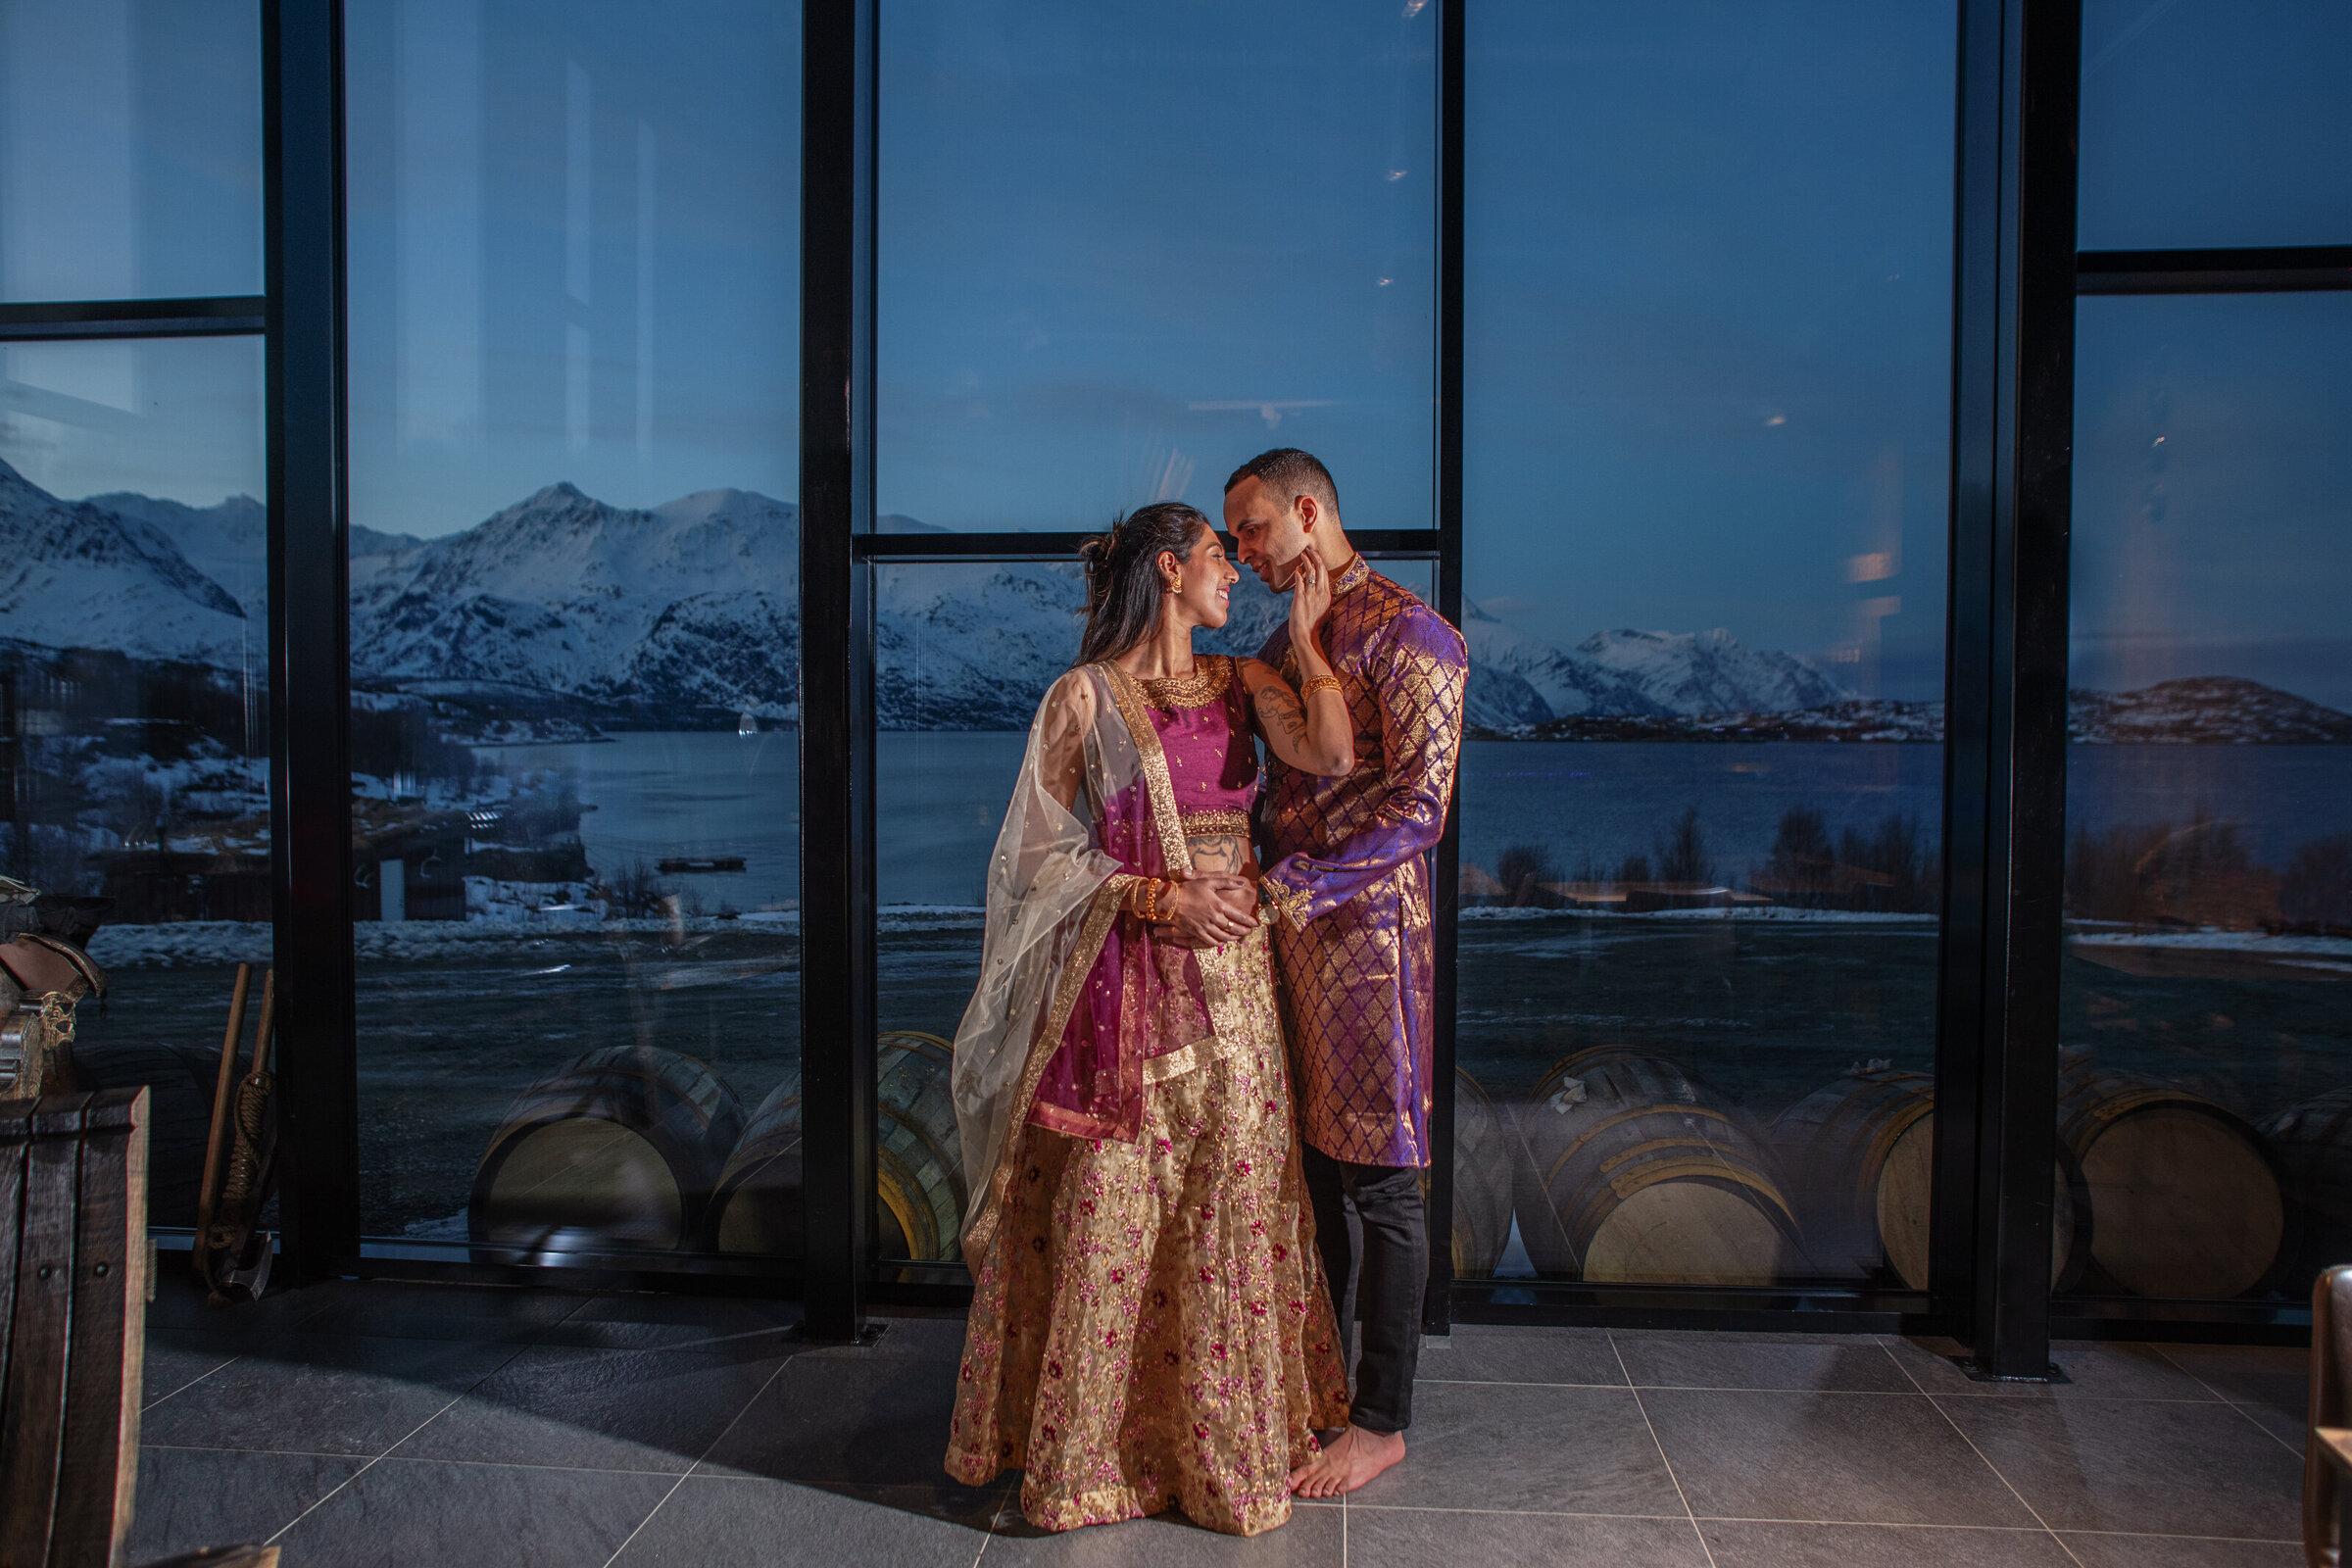 An intimate indoor moment at Aurora Spirit Distillery, shared by an Indian couple in traditional Indian wedding attire, where they stand cuddled together, with the stunning backdrop of Lyngen fjord through full floor to ceiling glass windows, captured by their elopement photographer.